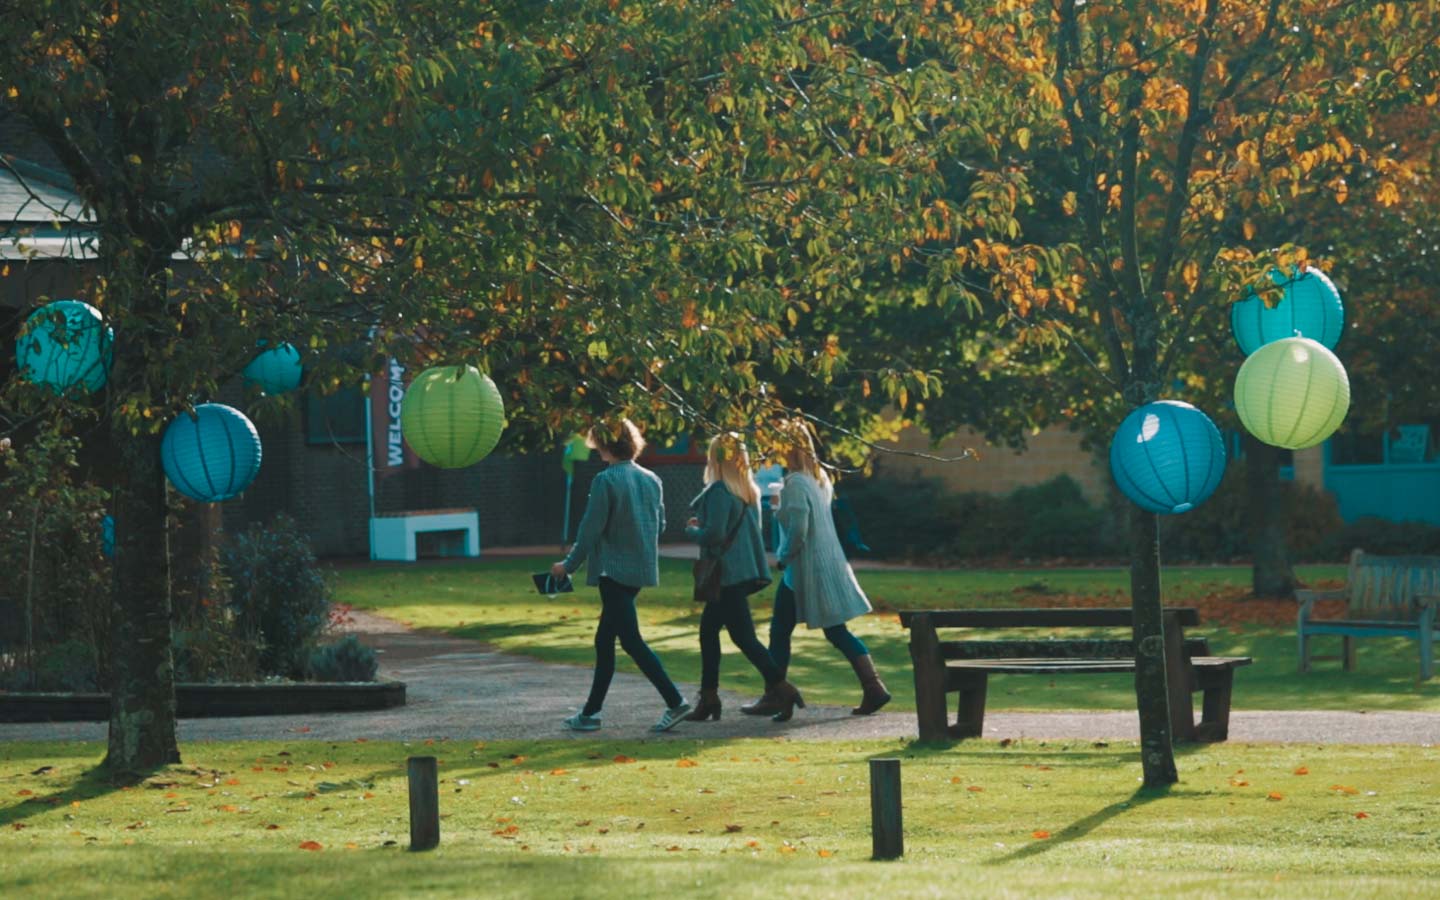 People walking on a the green campus with paper lanterns in the trees